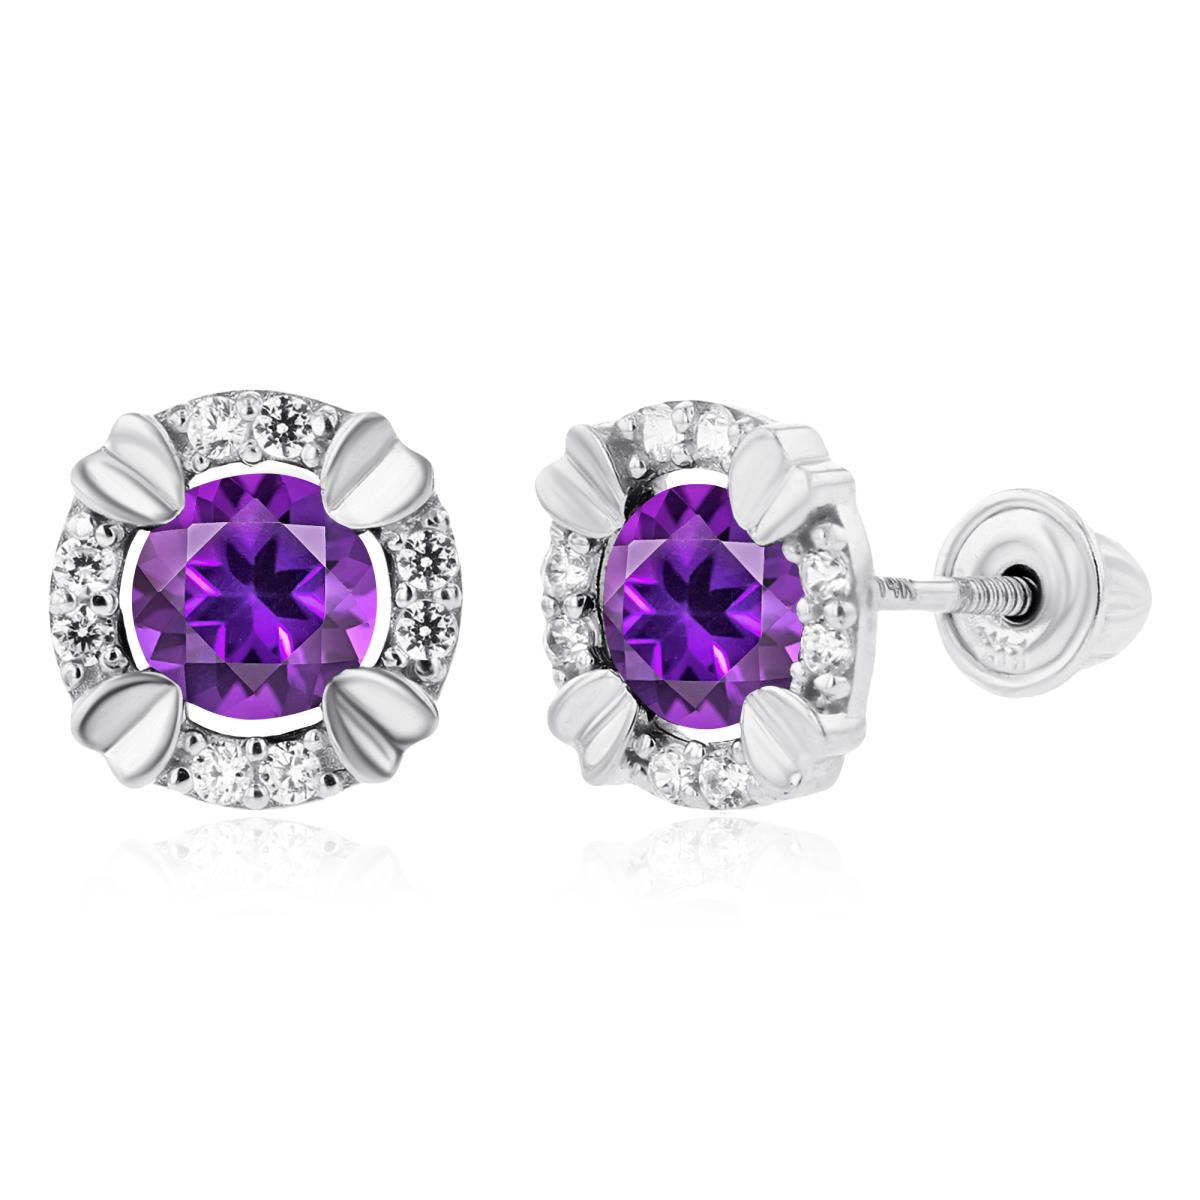 14K White Gold 4mm Round Amethyst & 1mm Created White Sapphire Halo Screwback Earrings